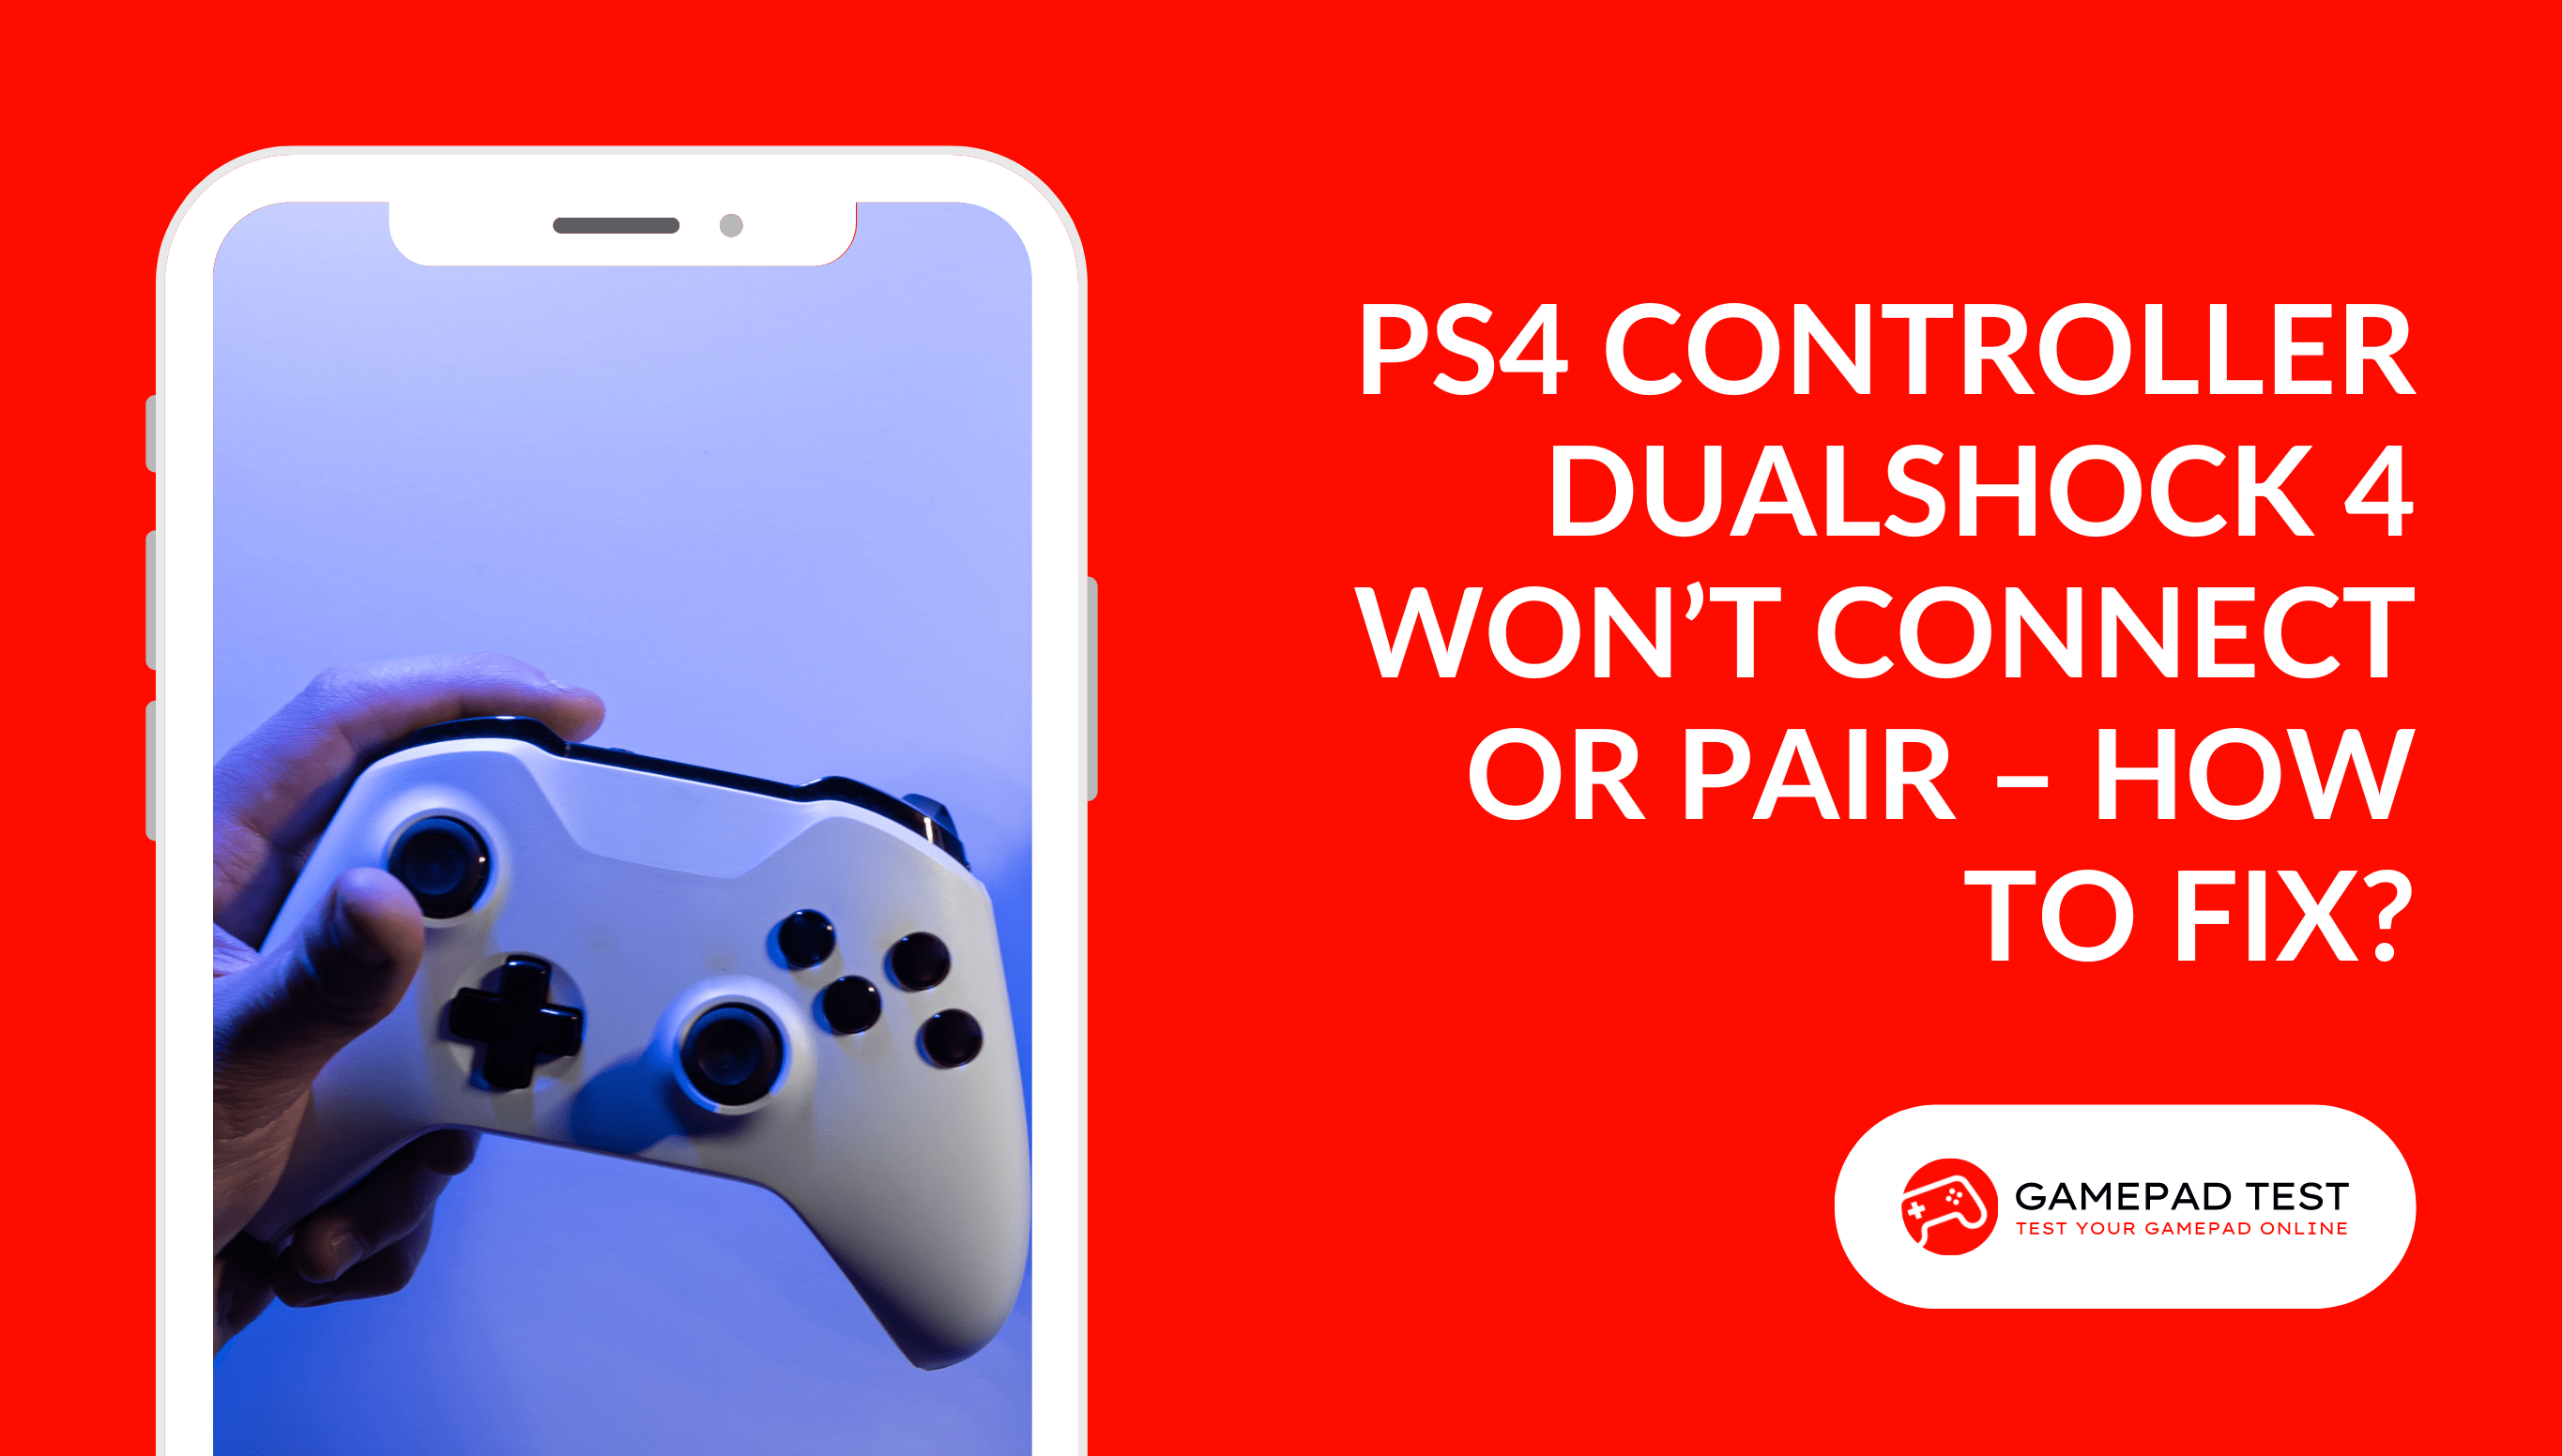 PS4 Controller DualShock 4 Won’t Connect or Pair – How to Fix - Blog Featured Image - gamepadtest.com